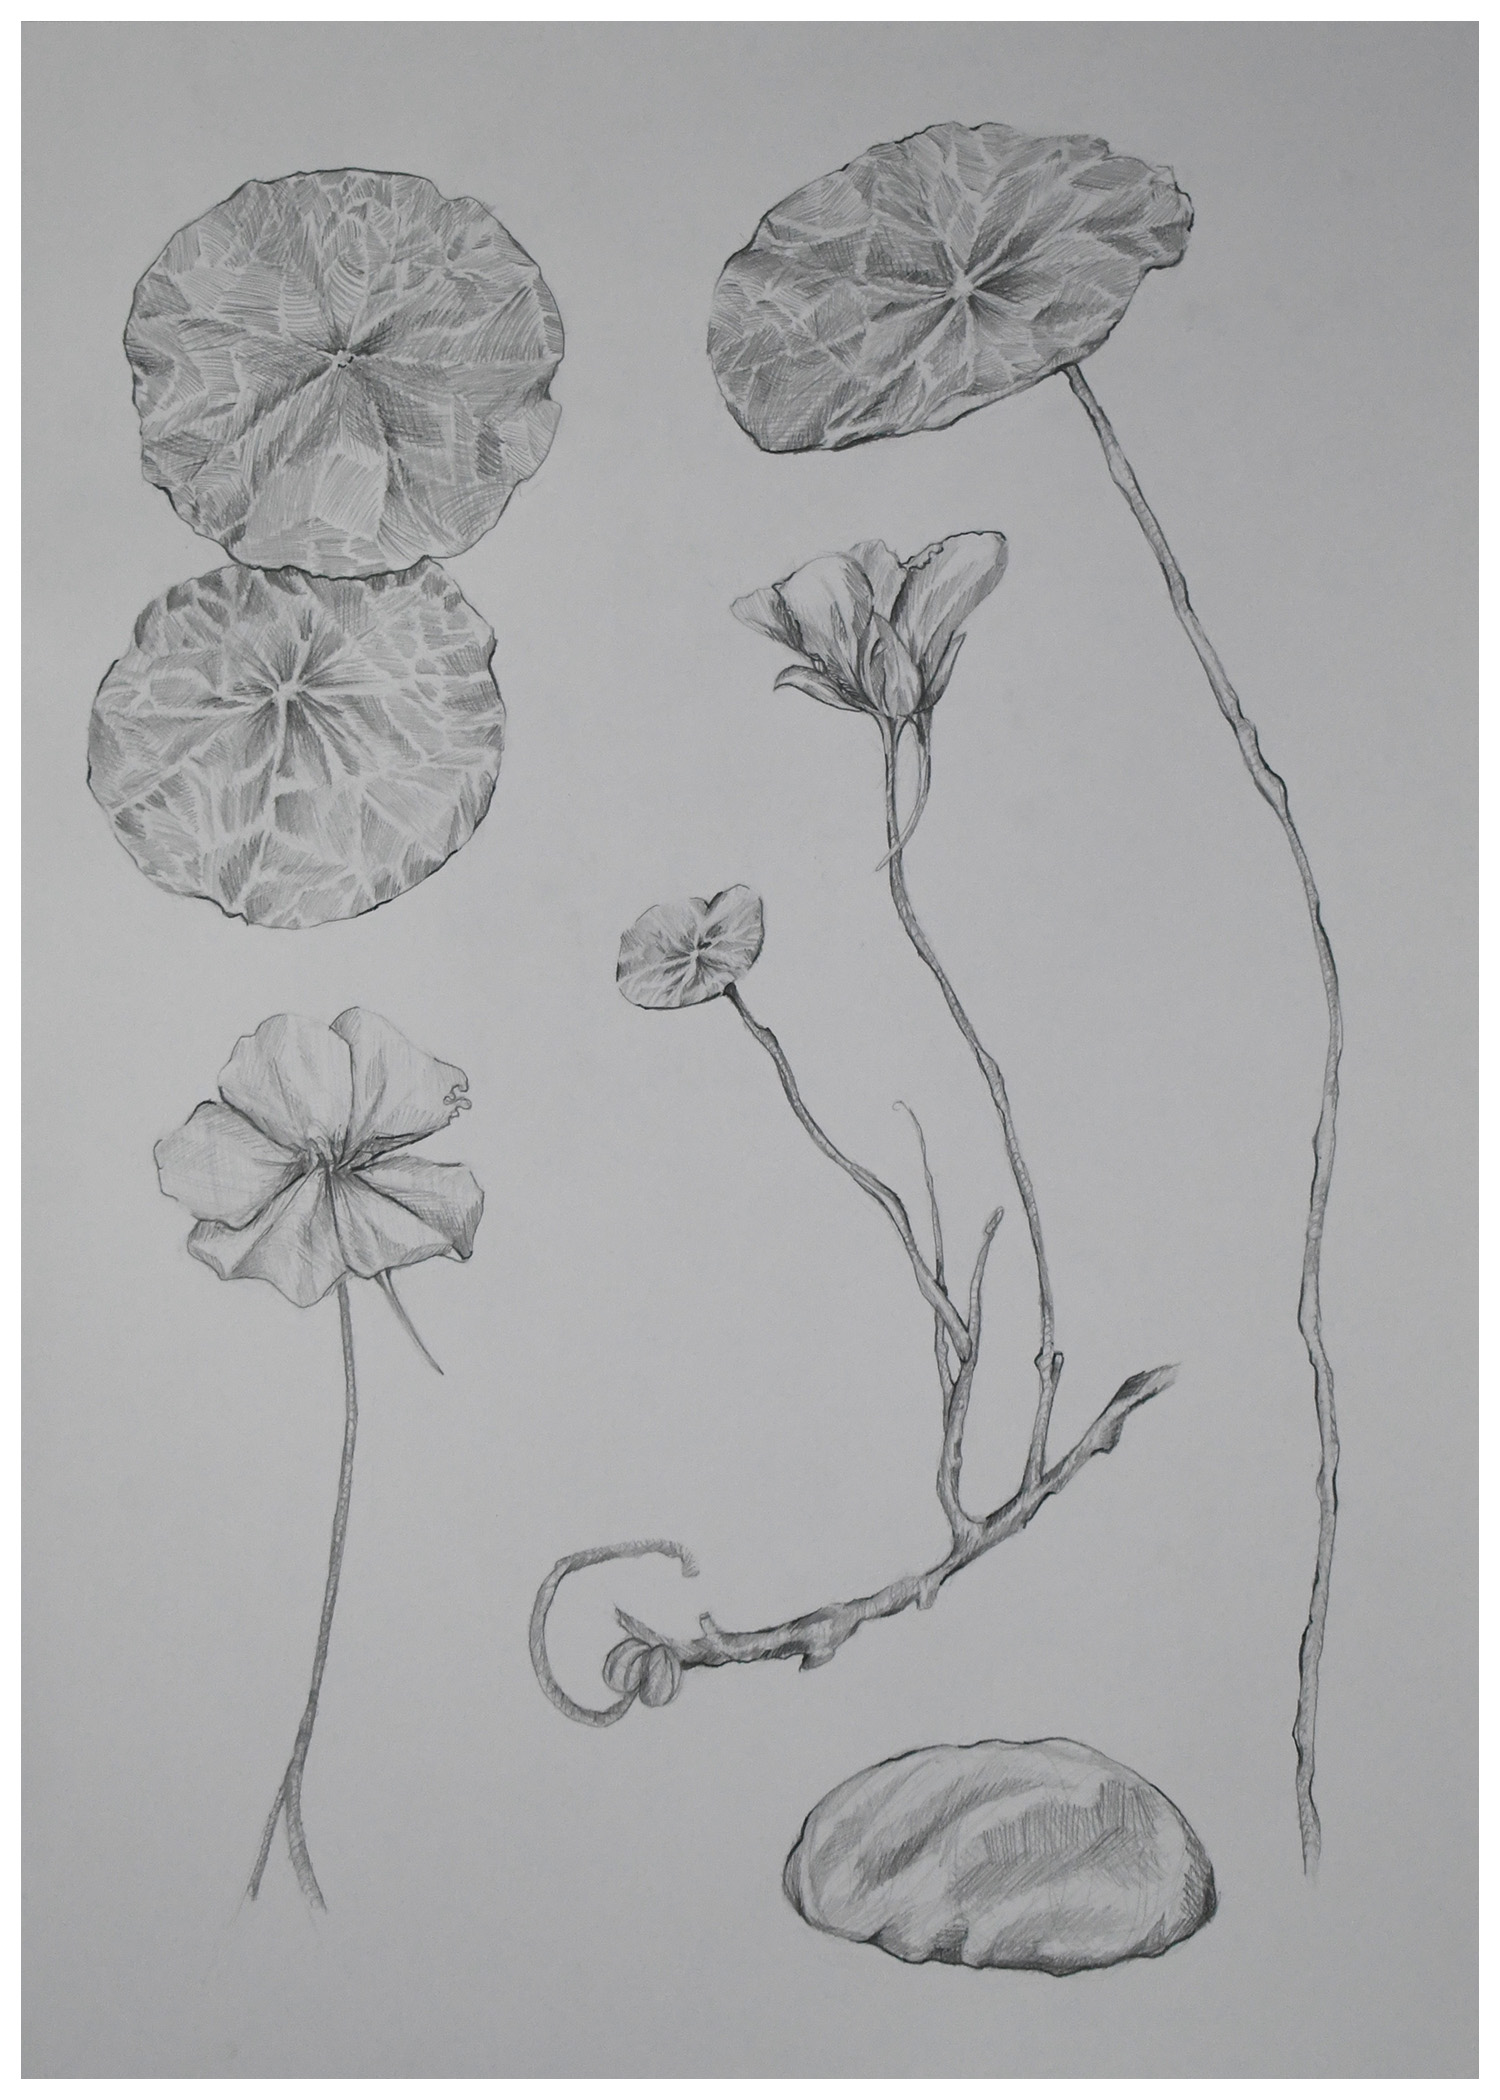 Pencil drawings of plants